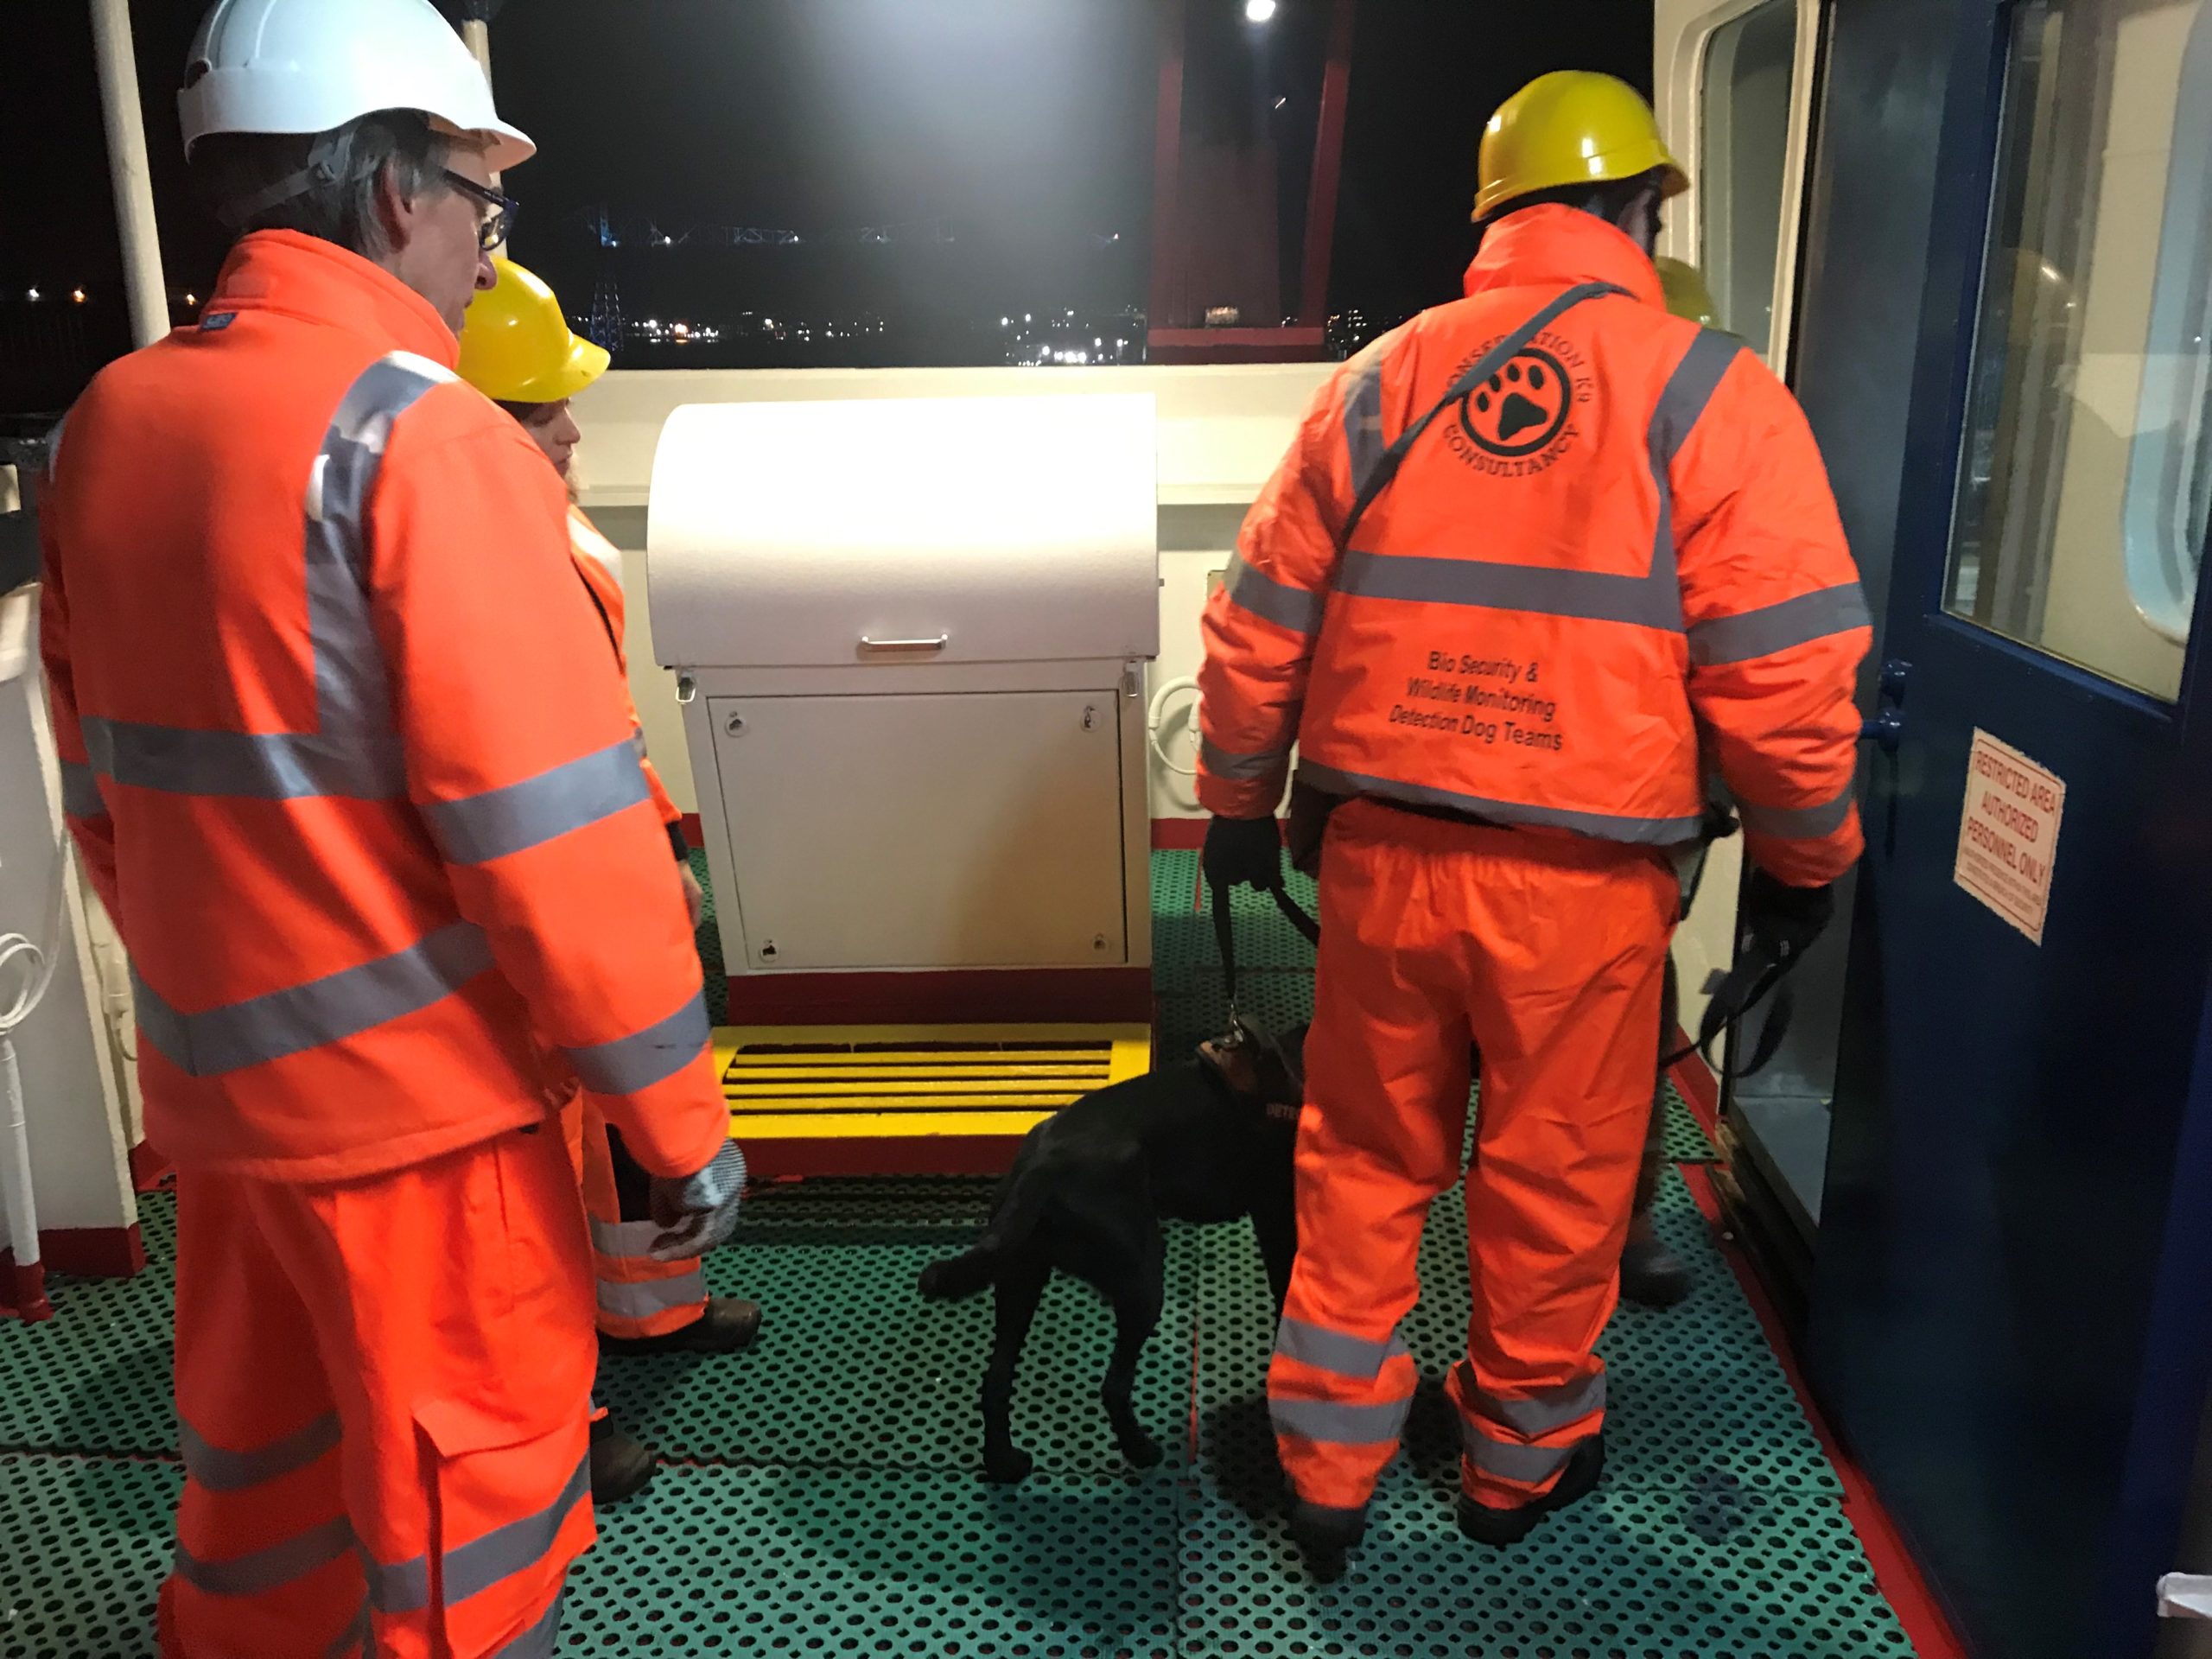 Rodent detection dogs check the cargo on the Billesborg in Teesport in the UK